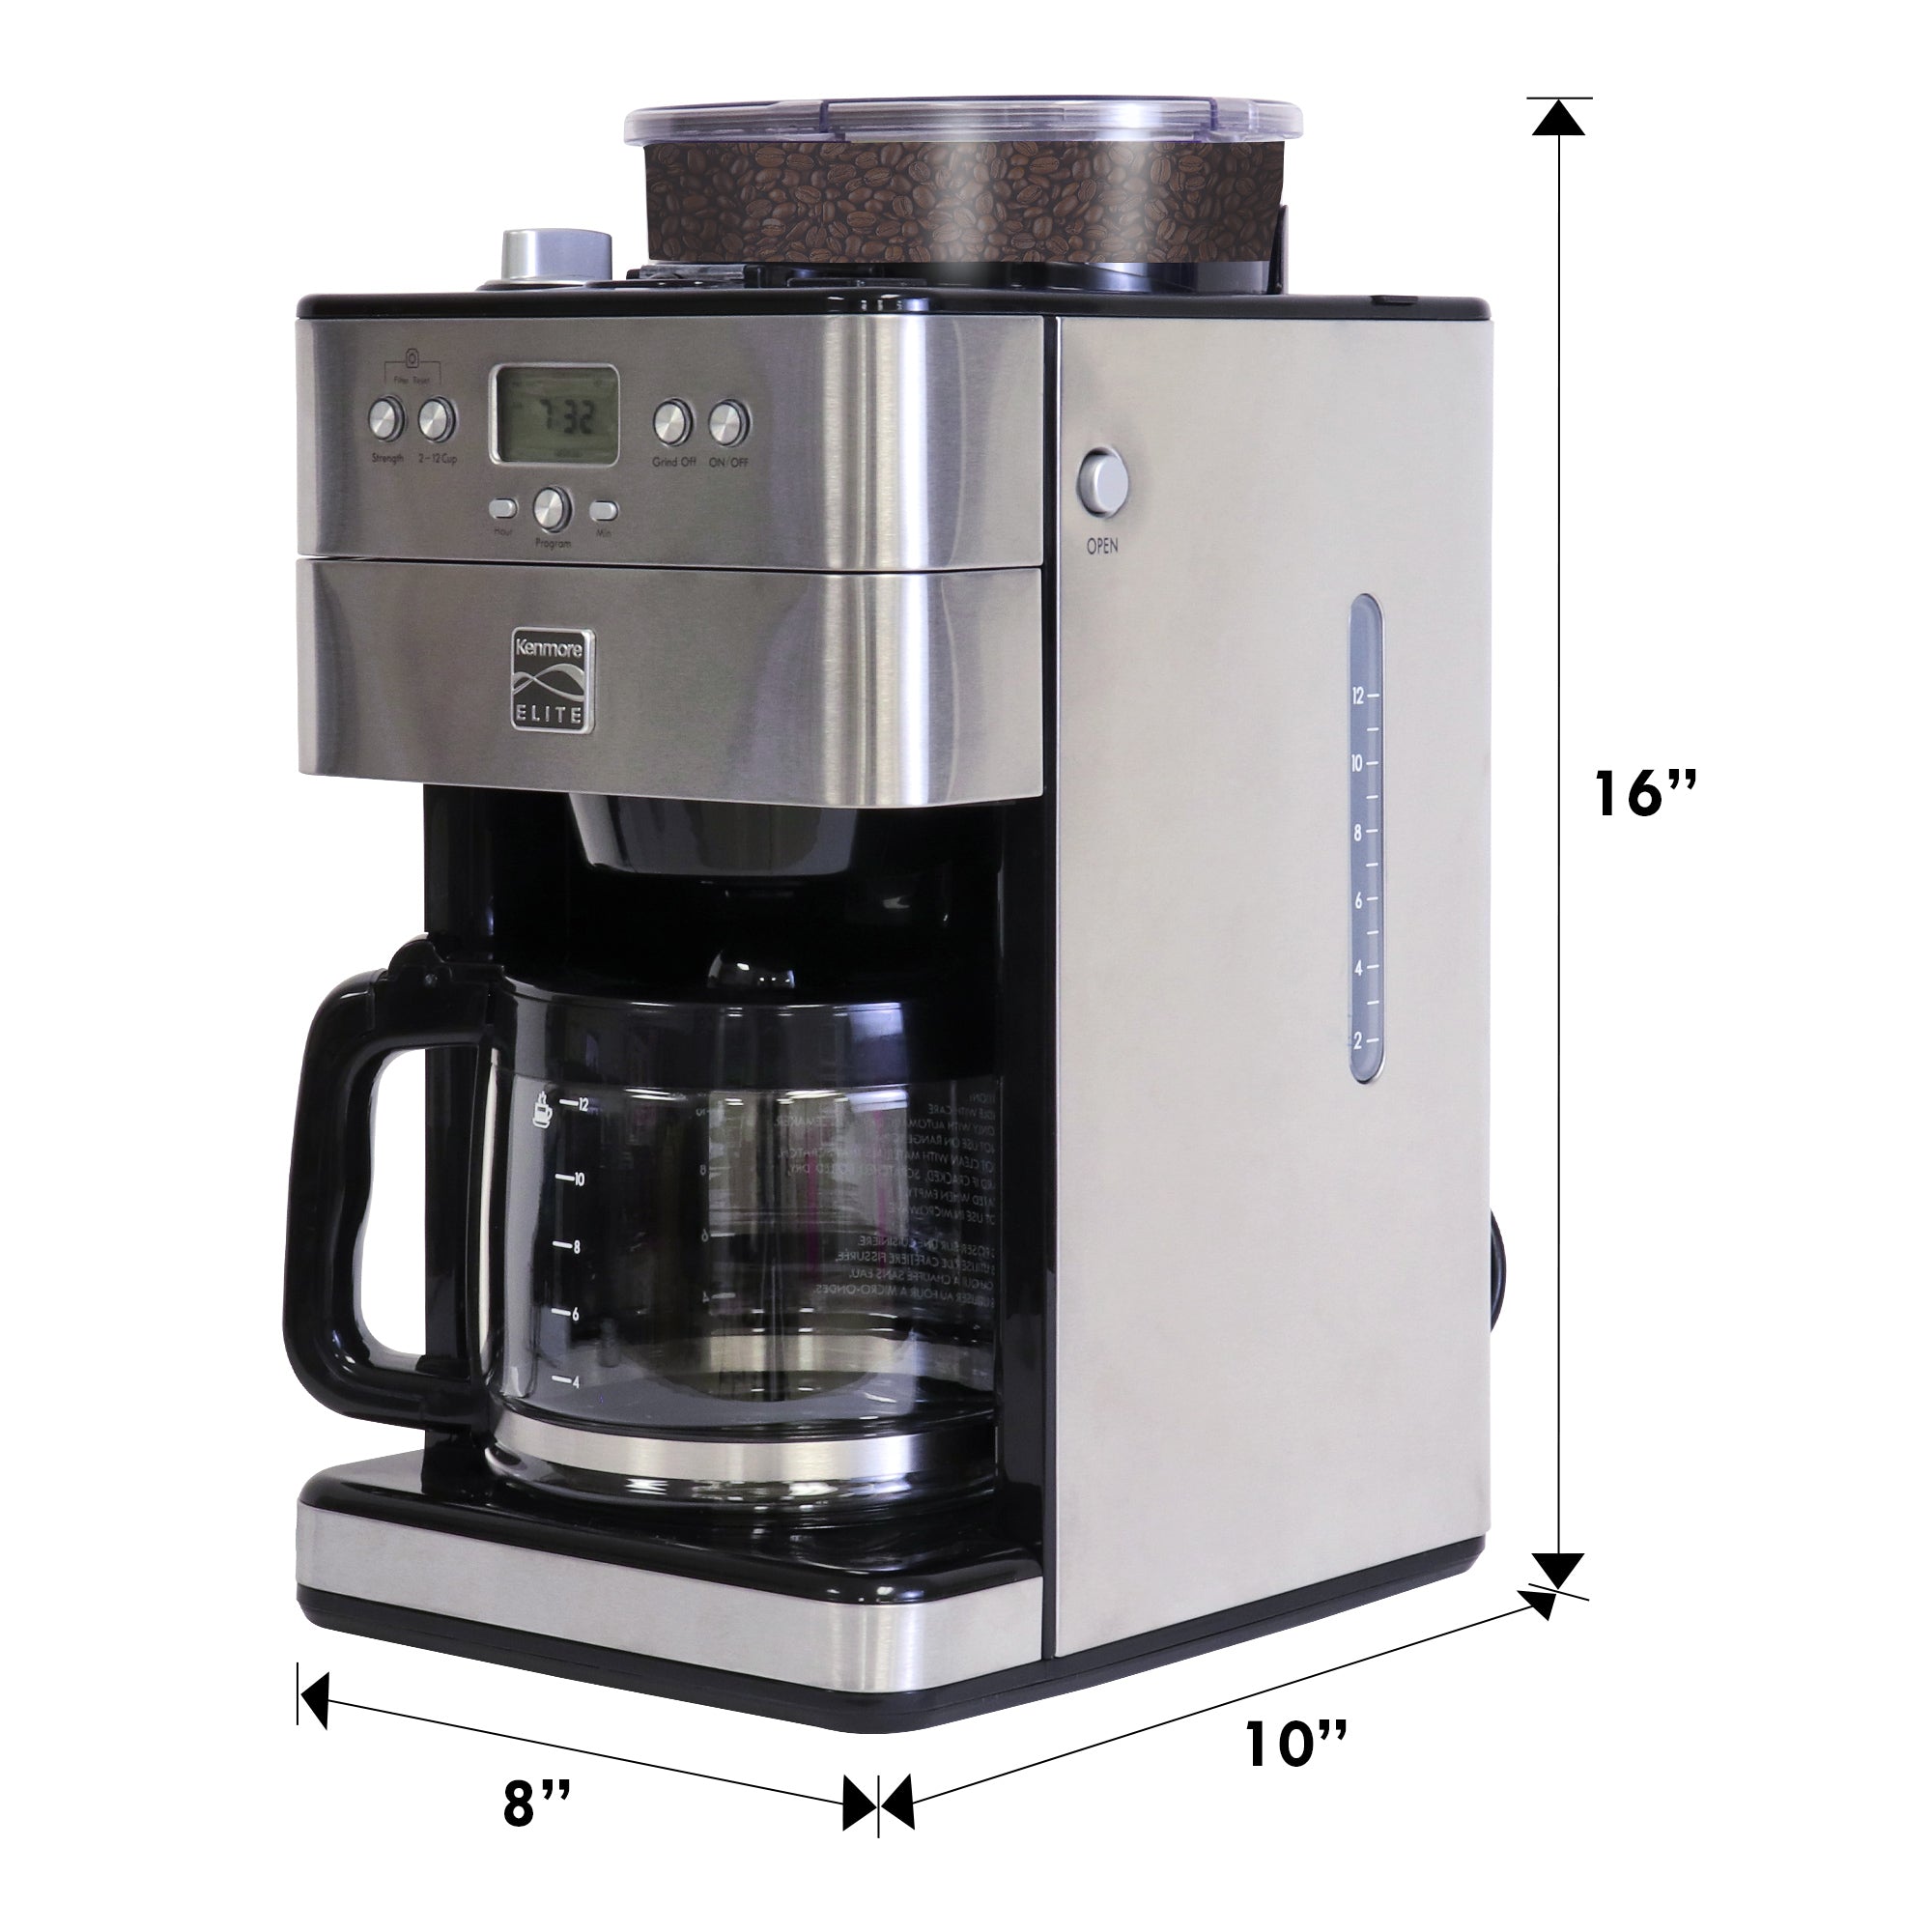 Product shot of Kenmore grind and brew coffee maker on a white background with dimensions labeled